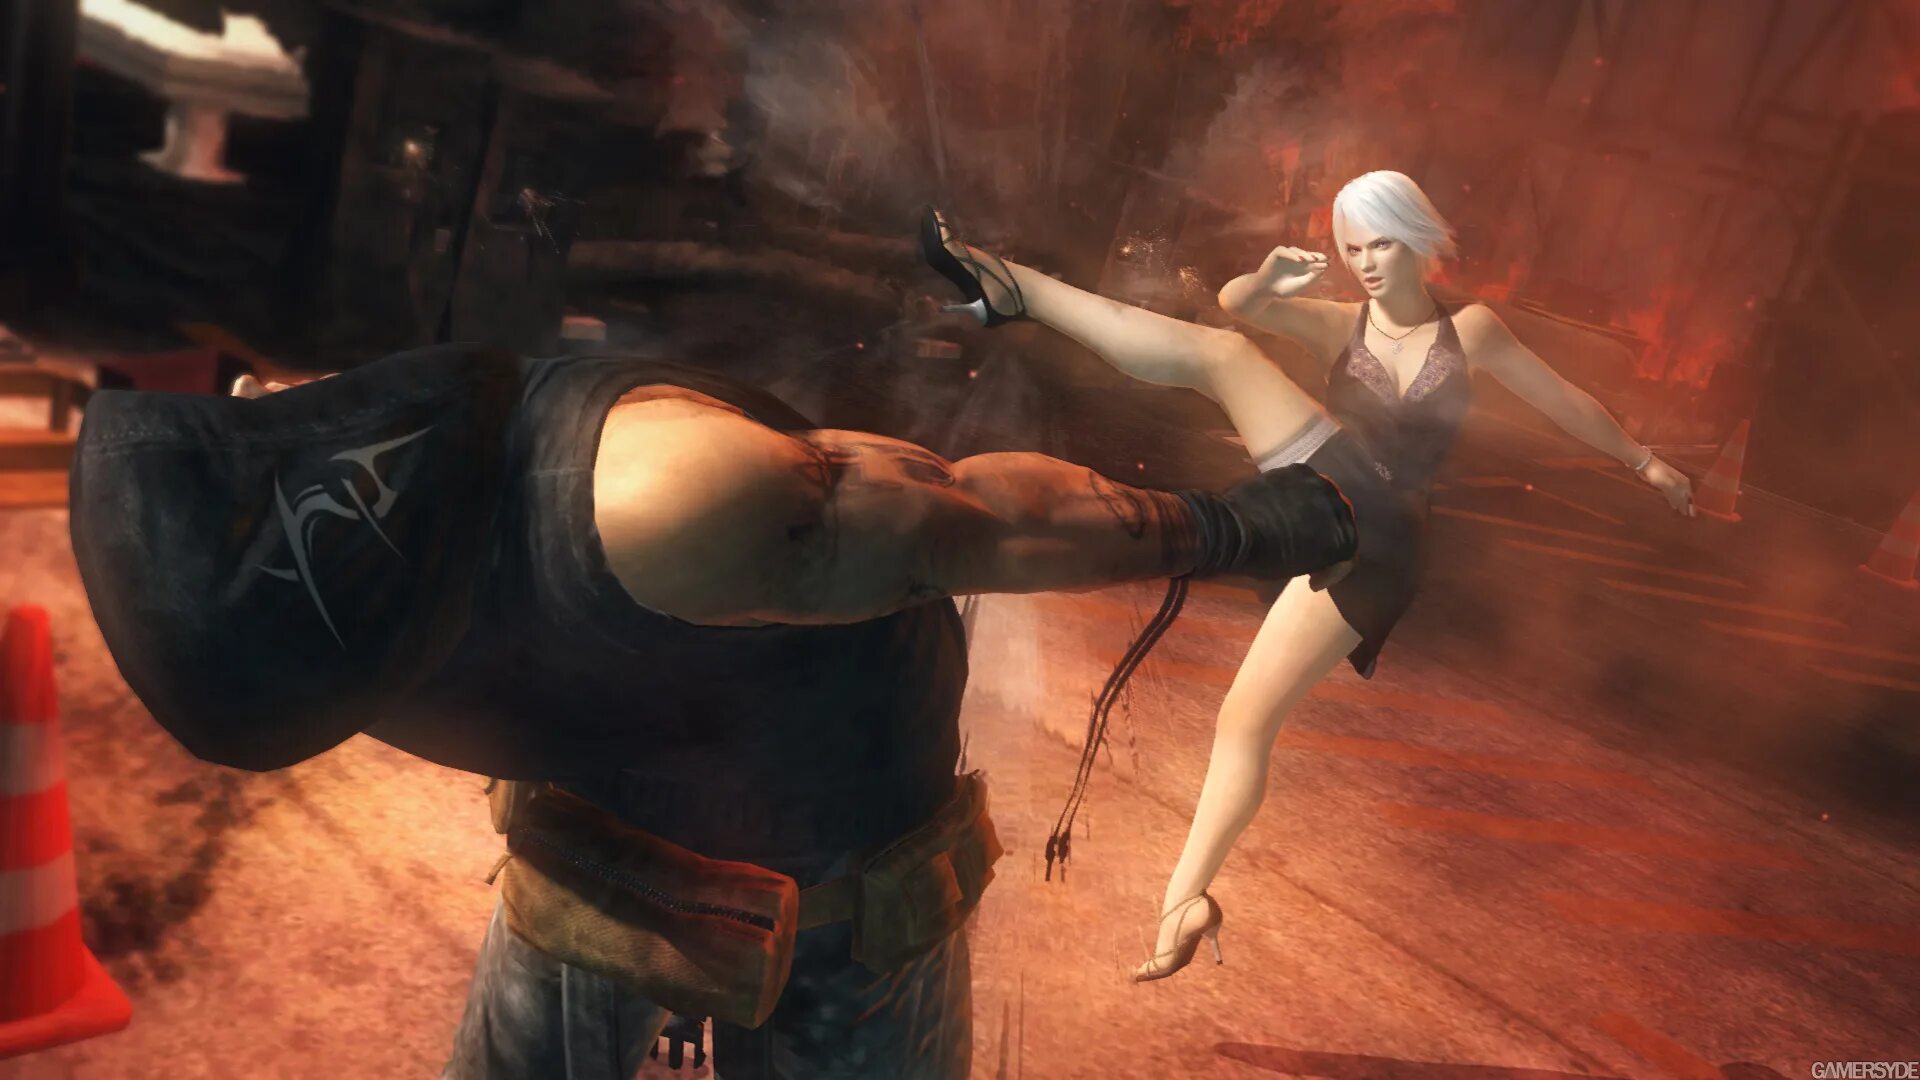 Dead or Alive 5. Dead or Alive 5 Кристи. Doa5 Rig. Dead or Alive 5 риг. Игры дед 5